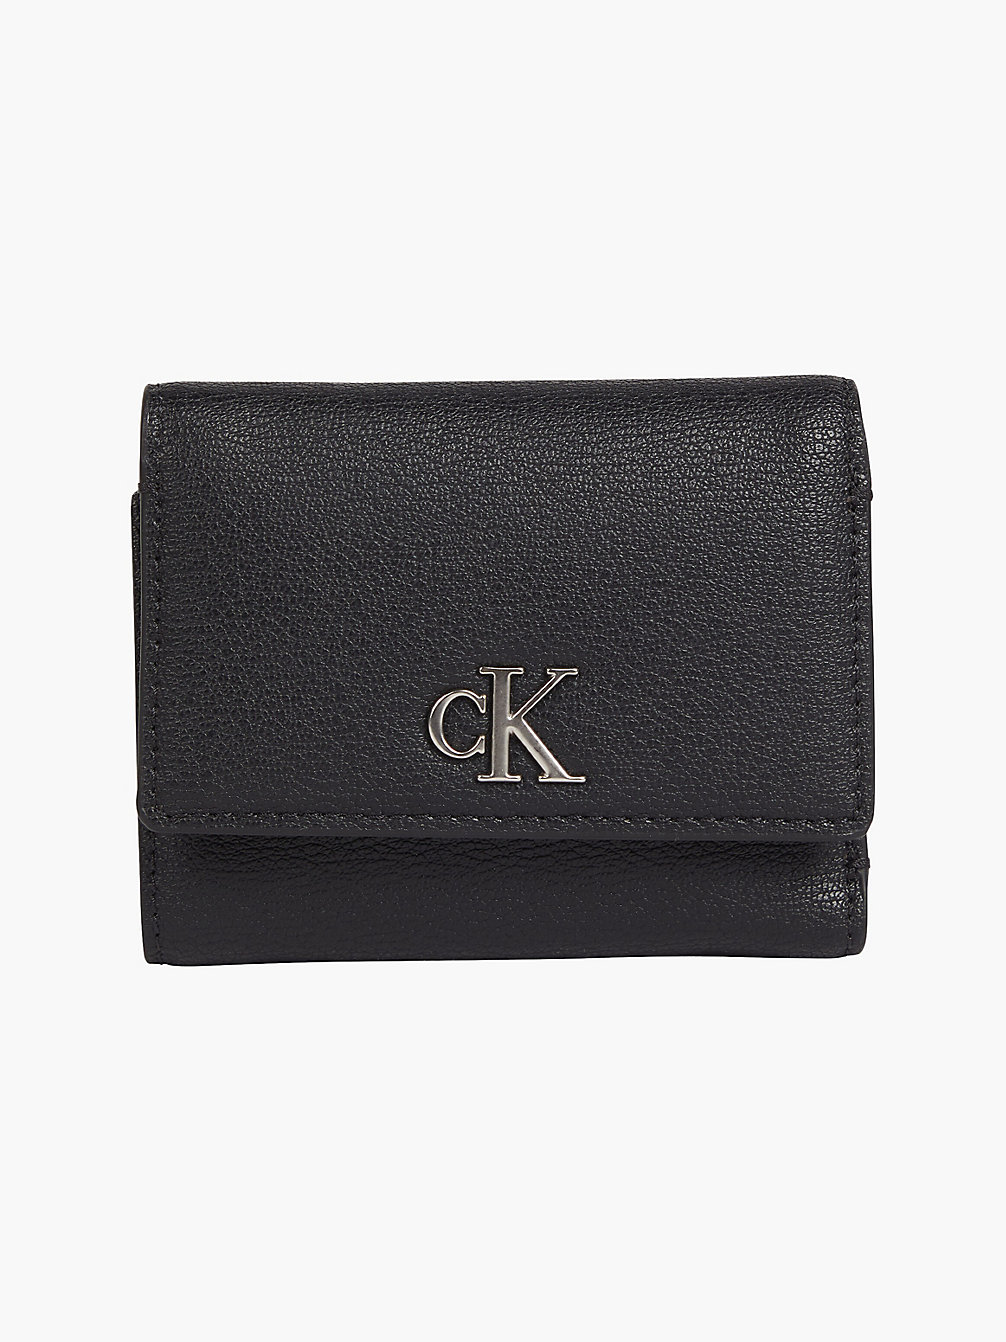 BLACK Recycled Trifold Wallet undefined women Calvin Klein